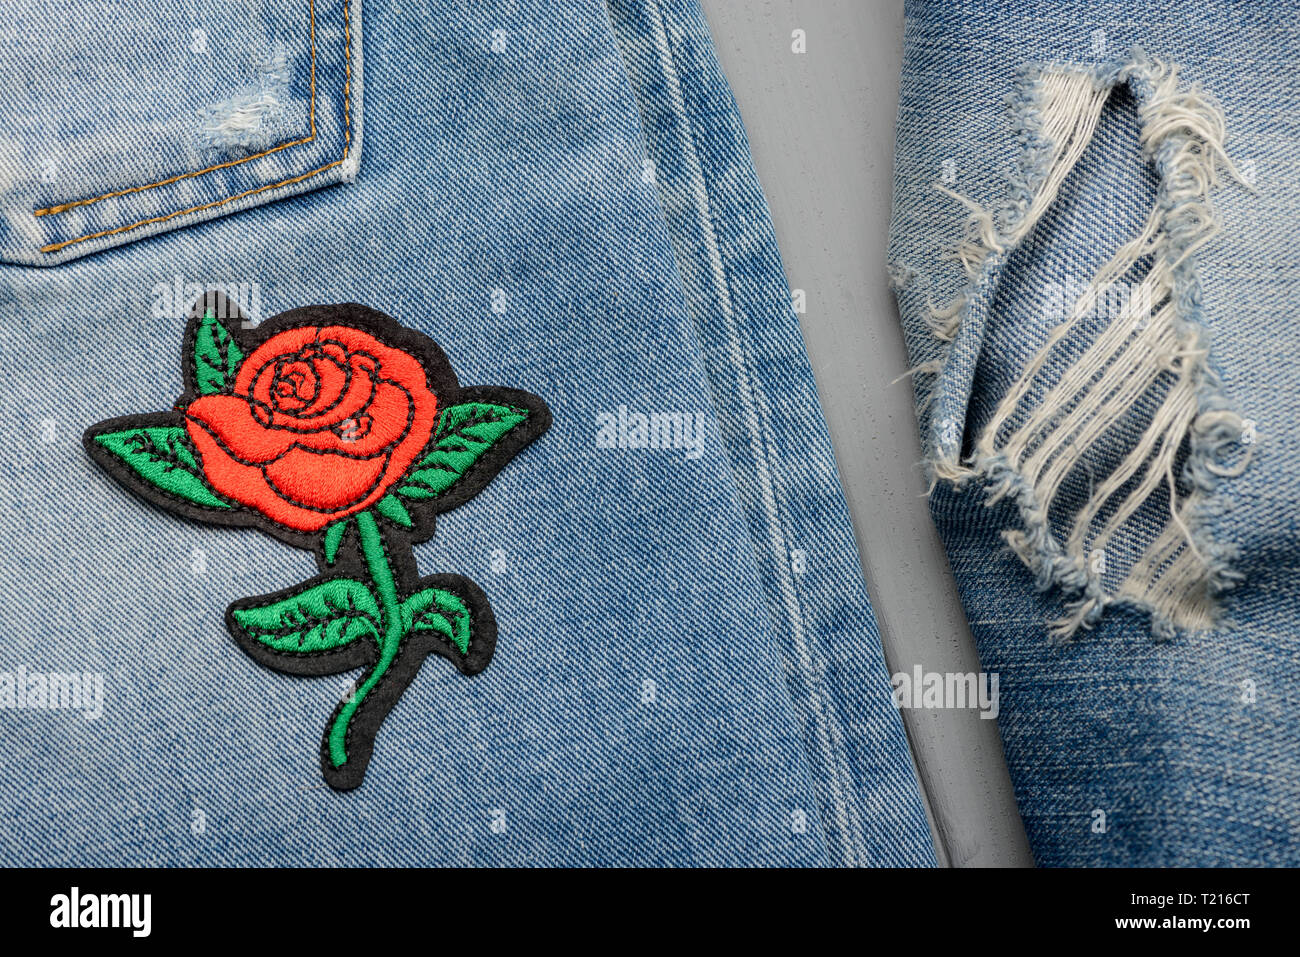 Red rose embroidered patch Stock Photo